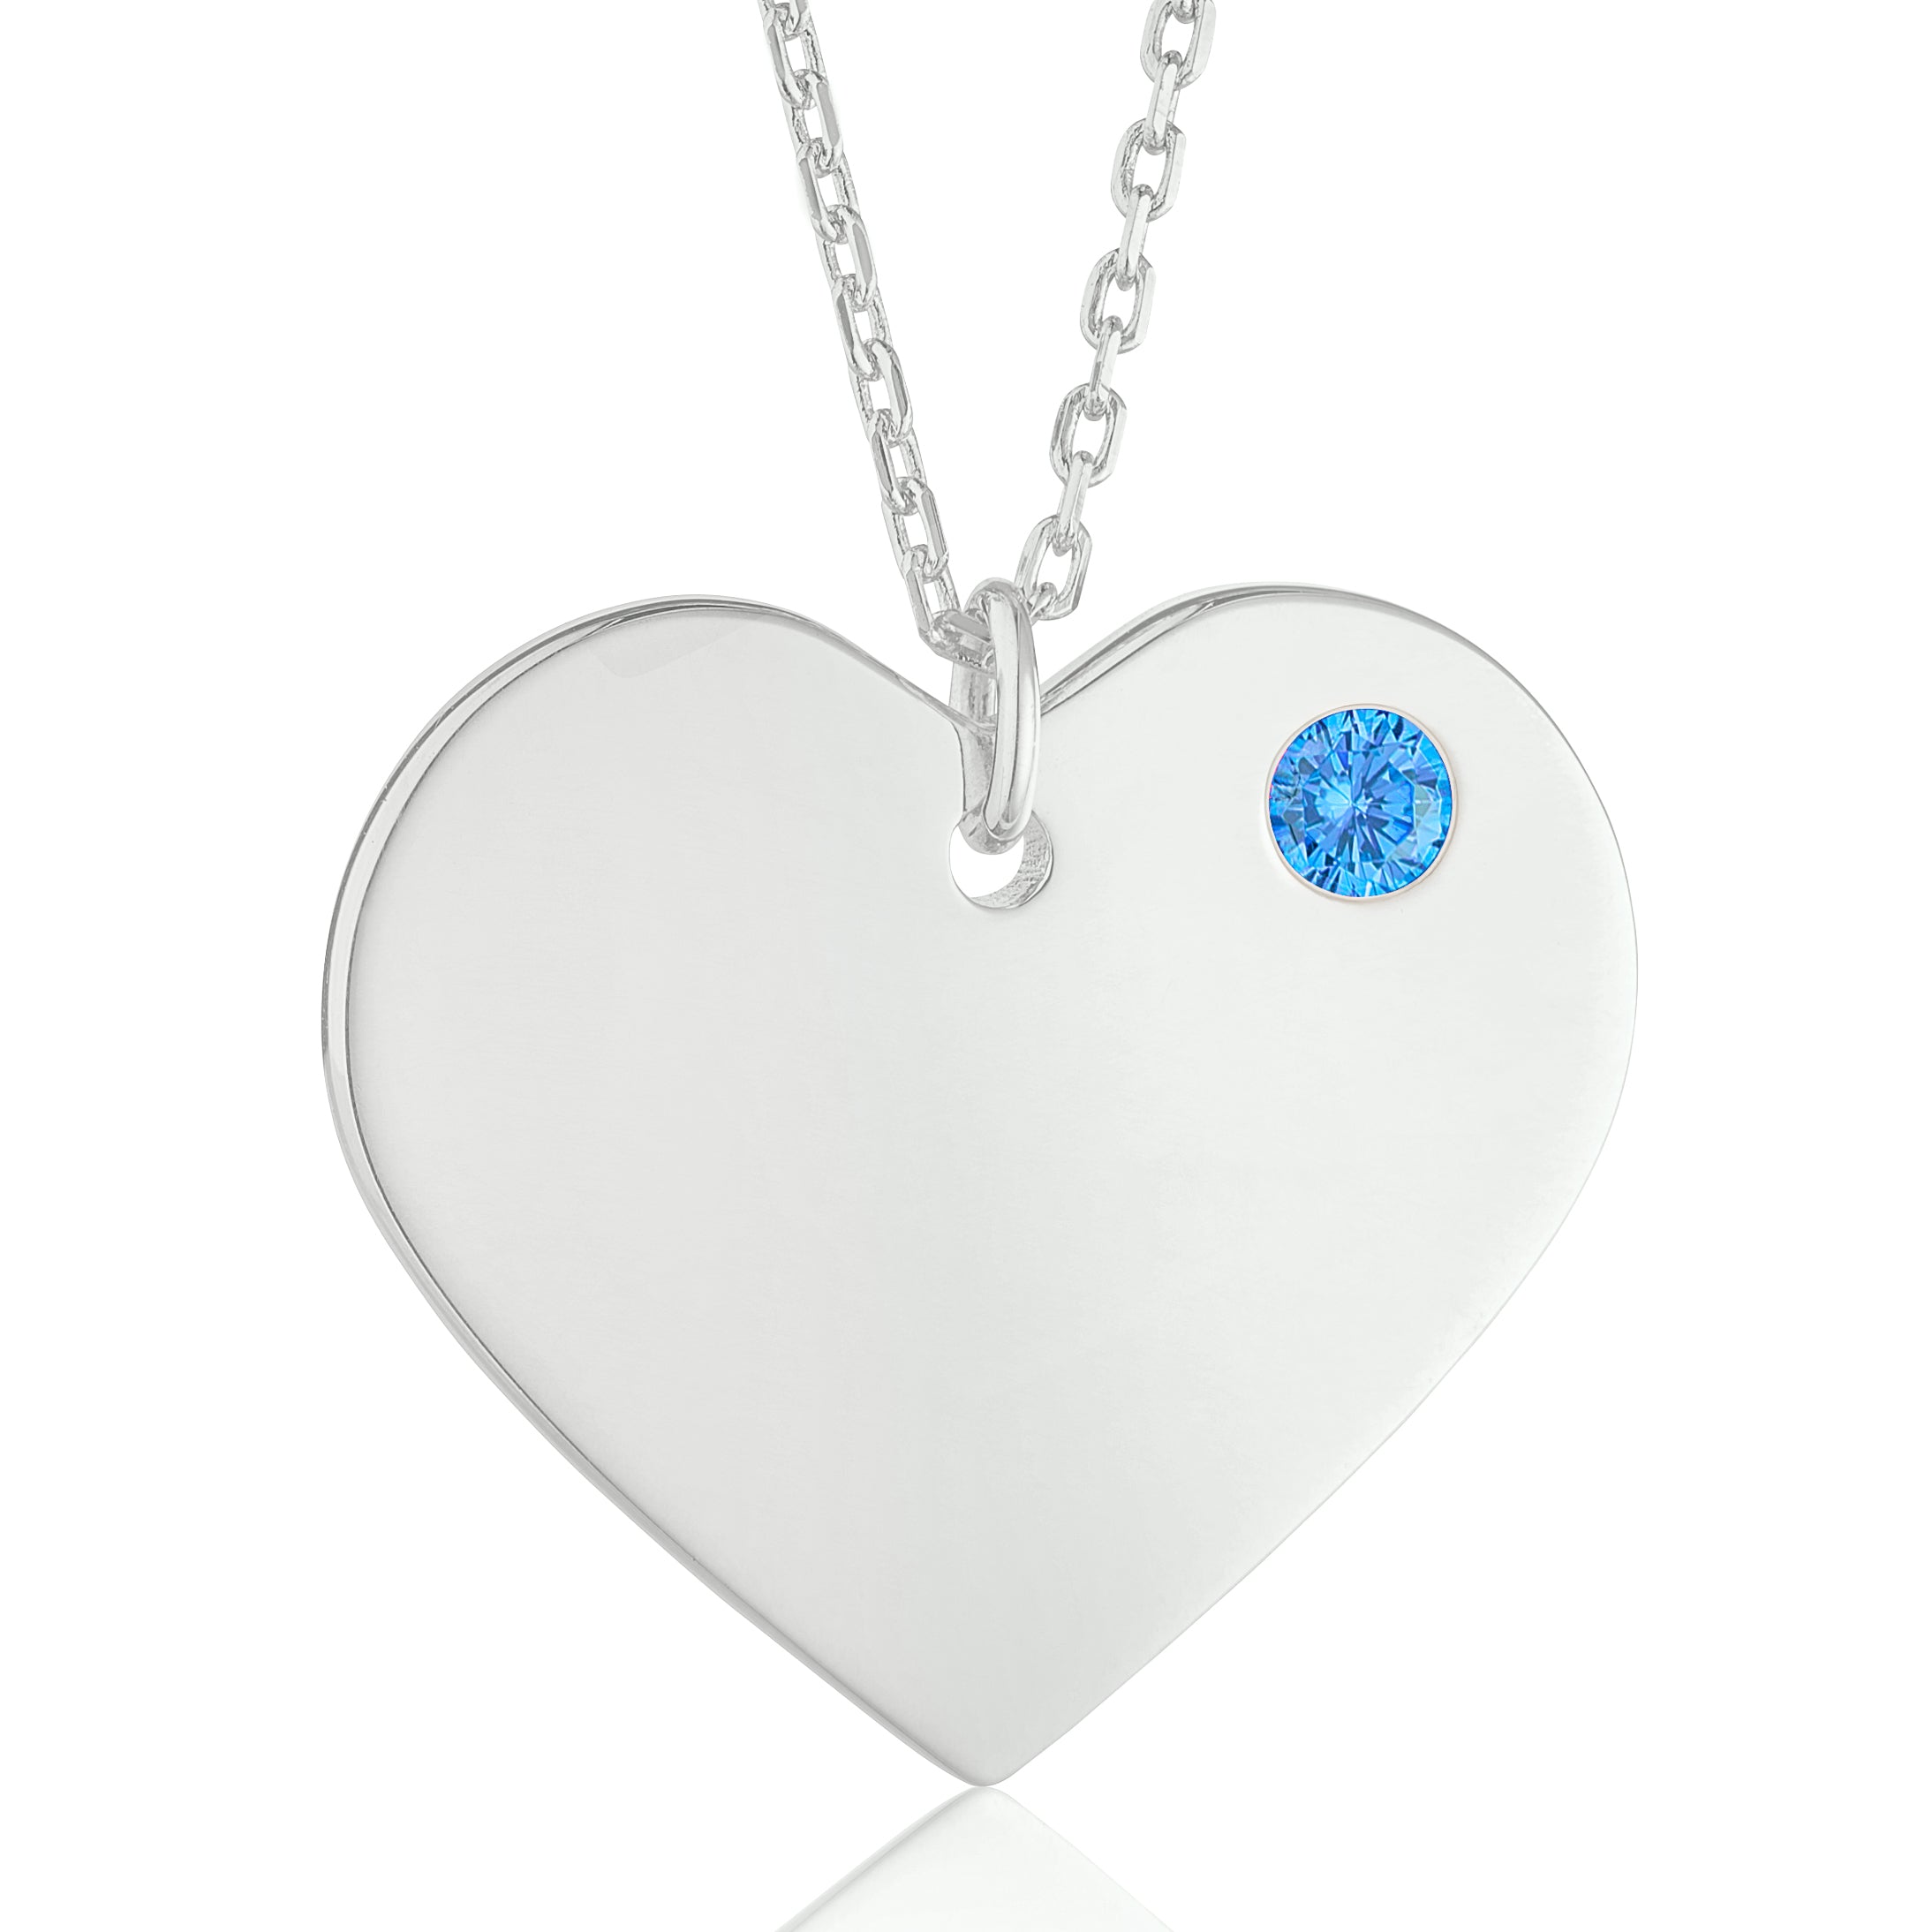 MASSETE Sterling Silver 925 Personalized Engraved Heart Necklace with Simulated Birthstone Custom Engravable Pendant for Women and Girls